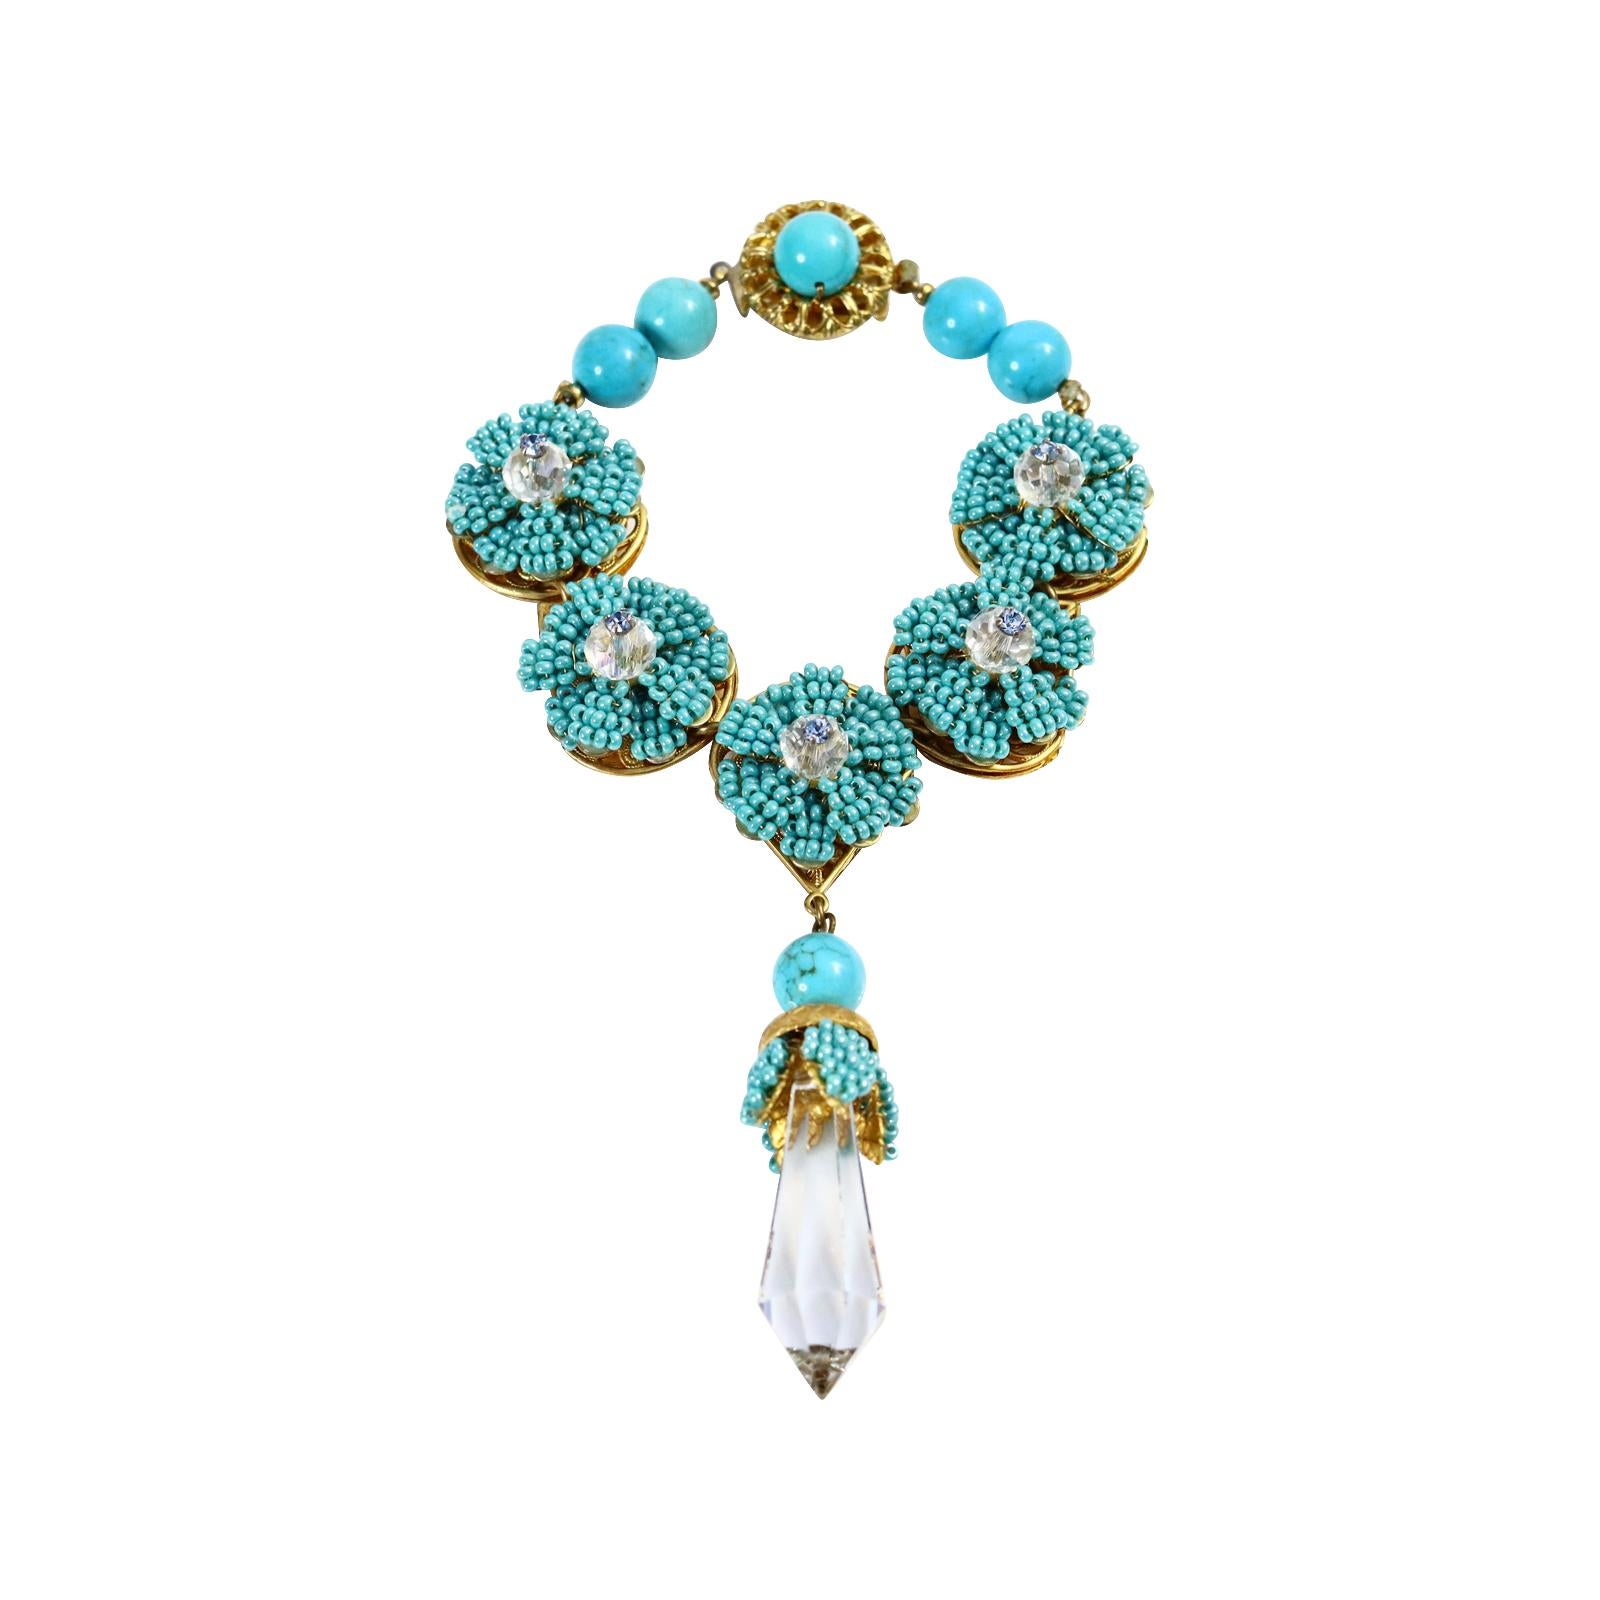 Vintage Stanley Hagler Faux Turquoise Dangling Crystal Bracelet Circa 1960s In Good Condition For Sale In New York, NY